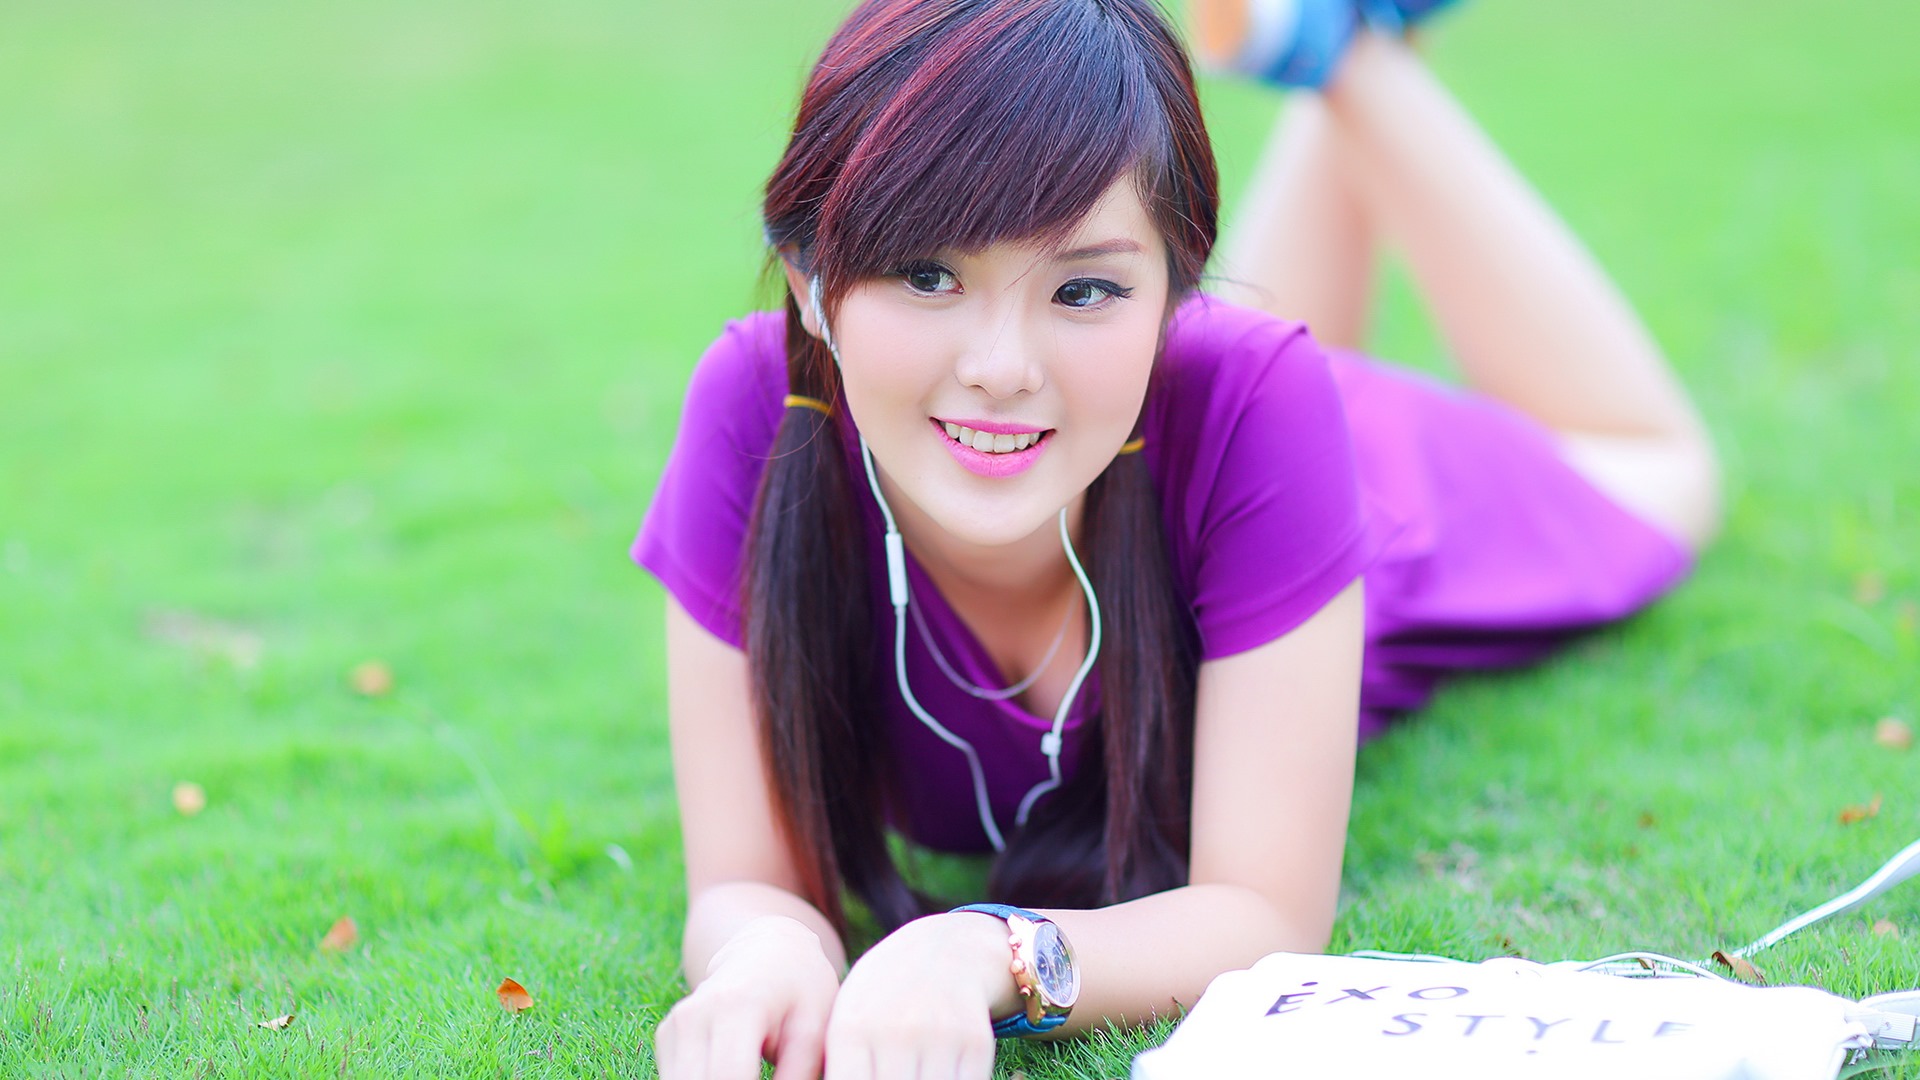 Pure and lovely young Asian girl HD wallpapers collection (3) #19 - 1920x1080